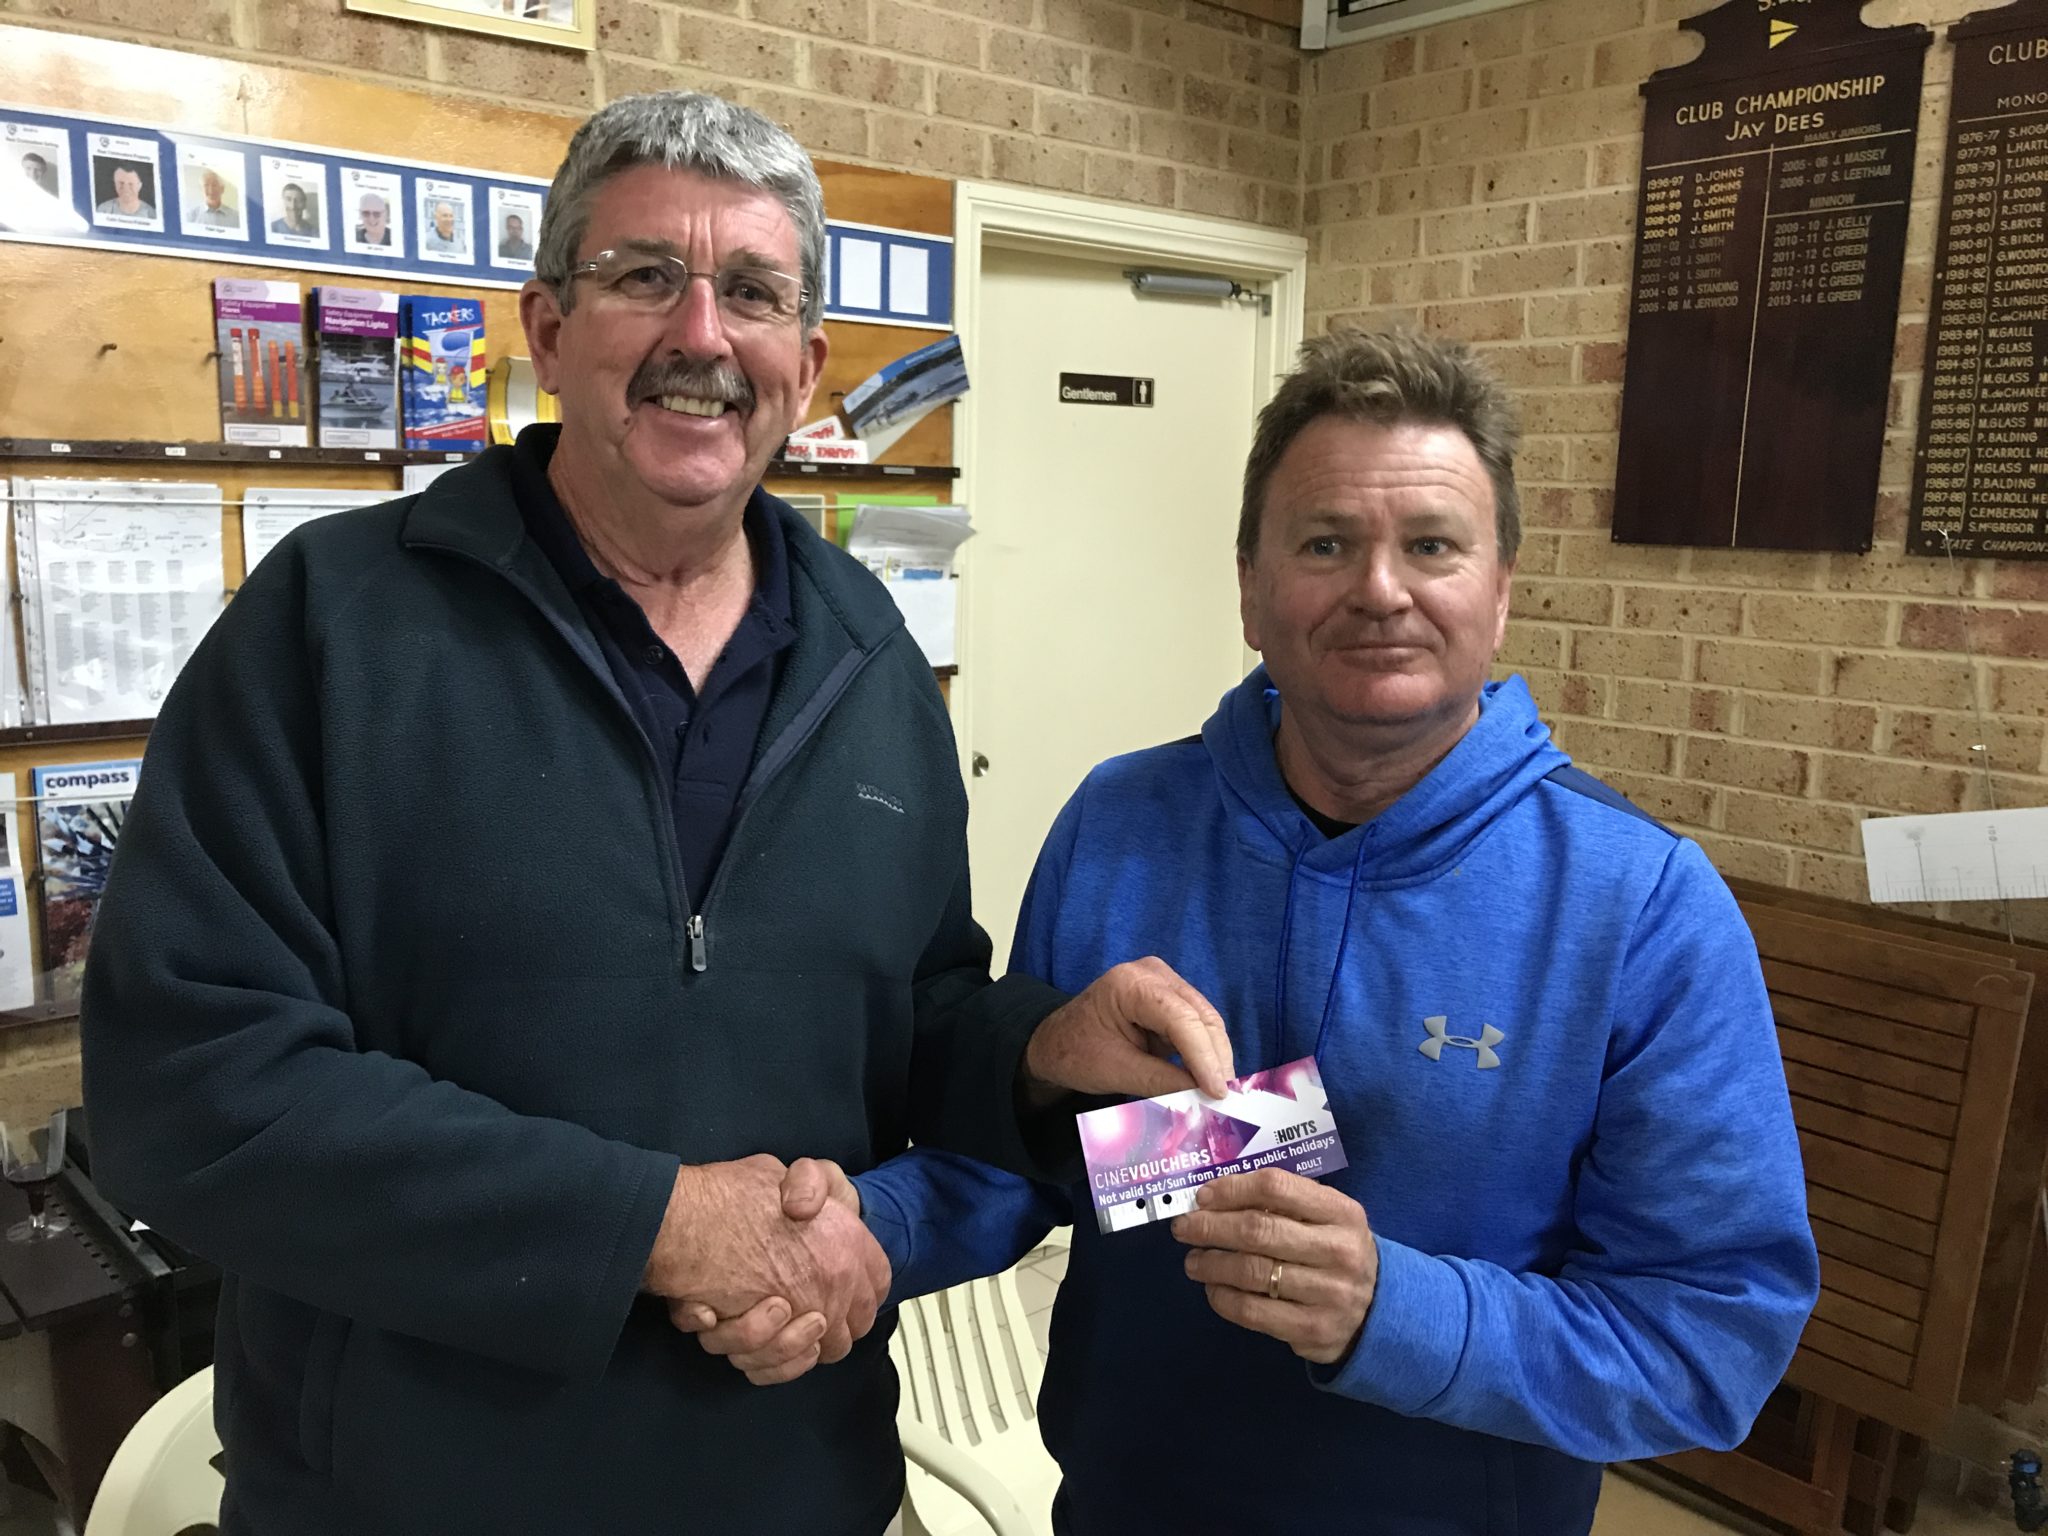 Tues 12th September 2017 : Tonight's photo shows Club Committee Member David Griffiths presenting Francis Nolan with a movie voucher.